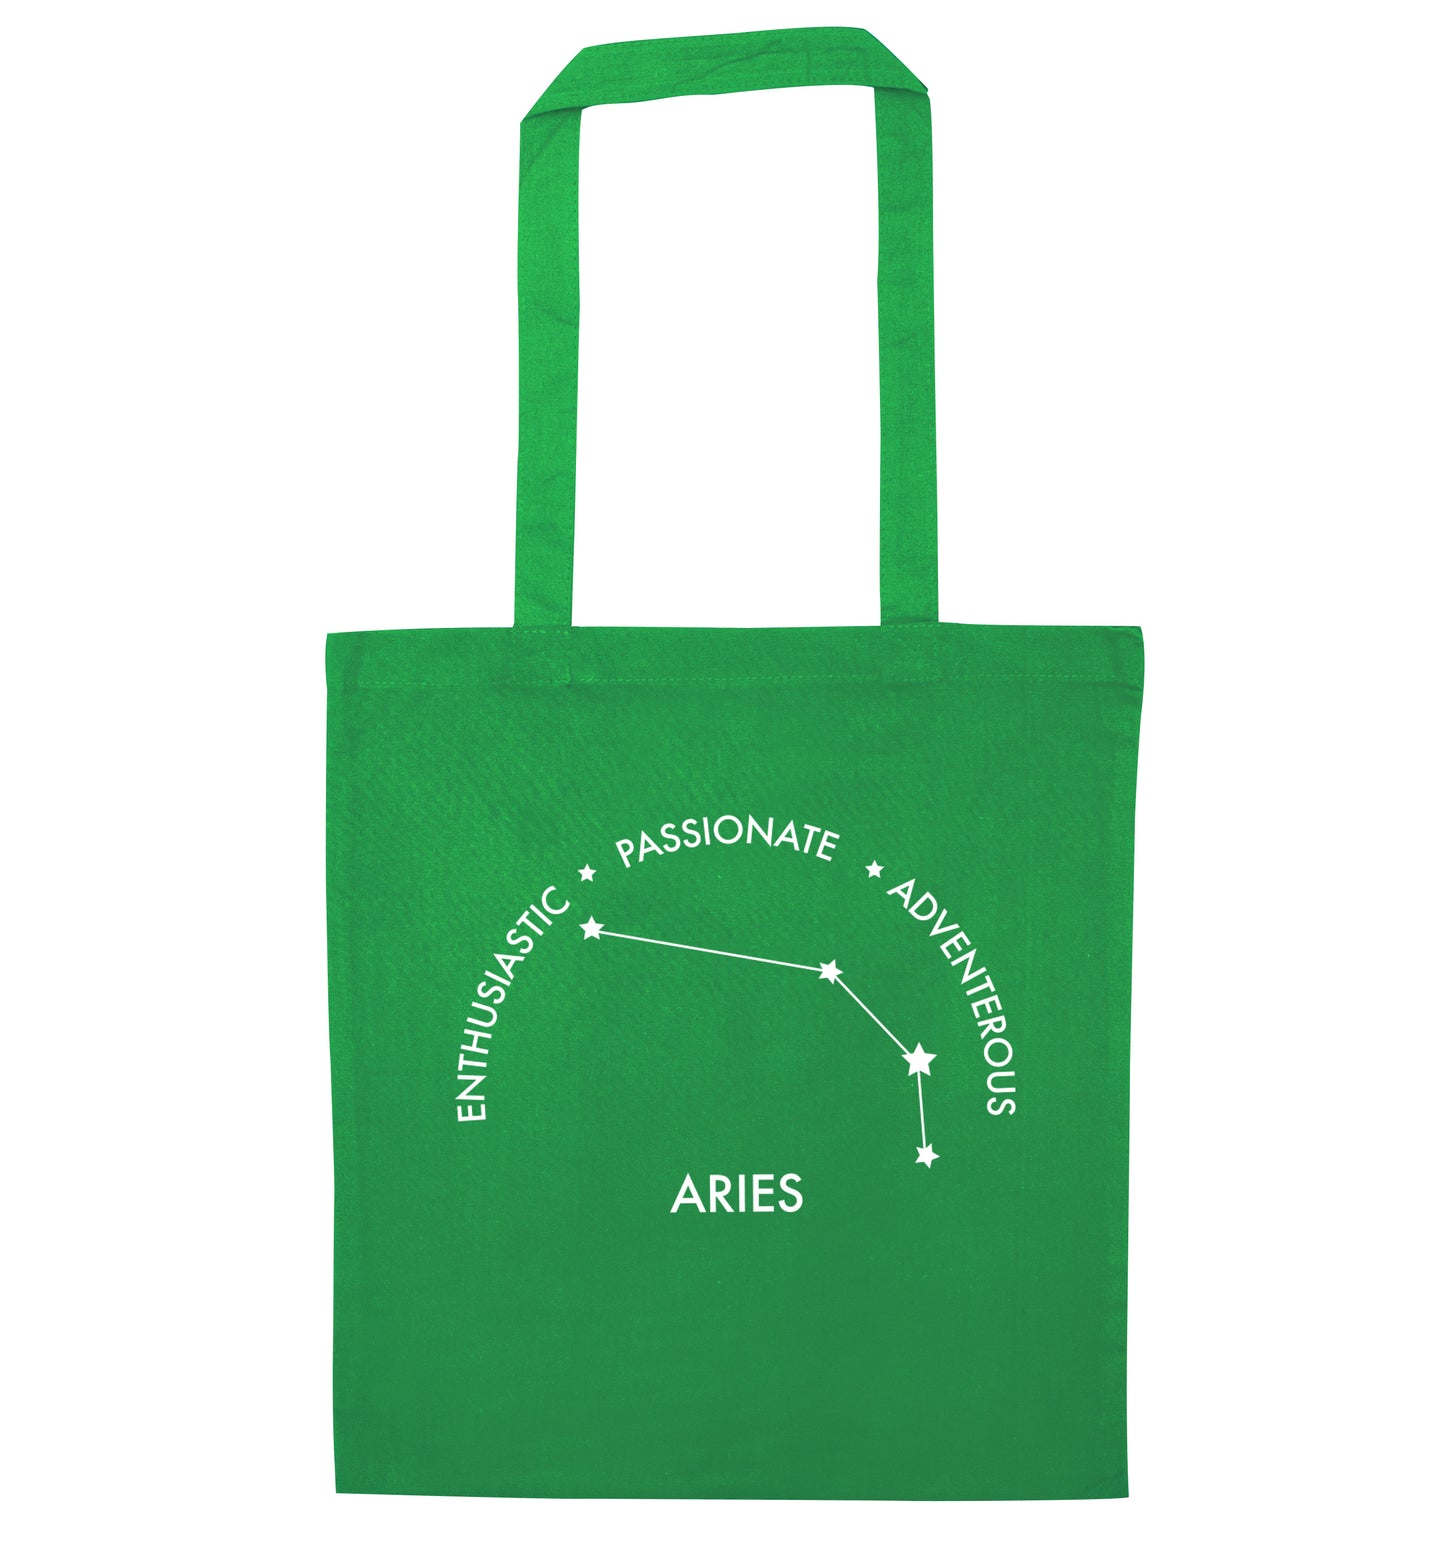 Aries enthusiastic | passionate | adventerous green tote bag